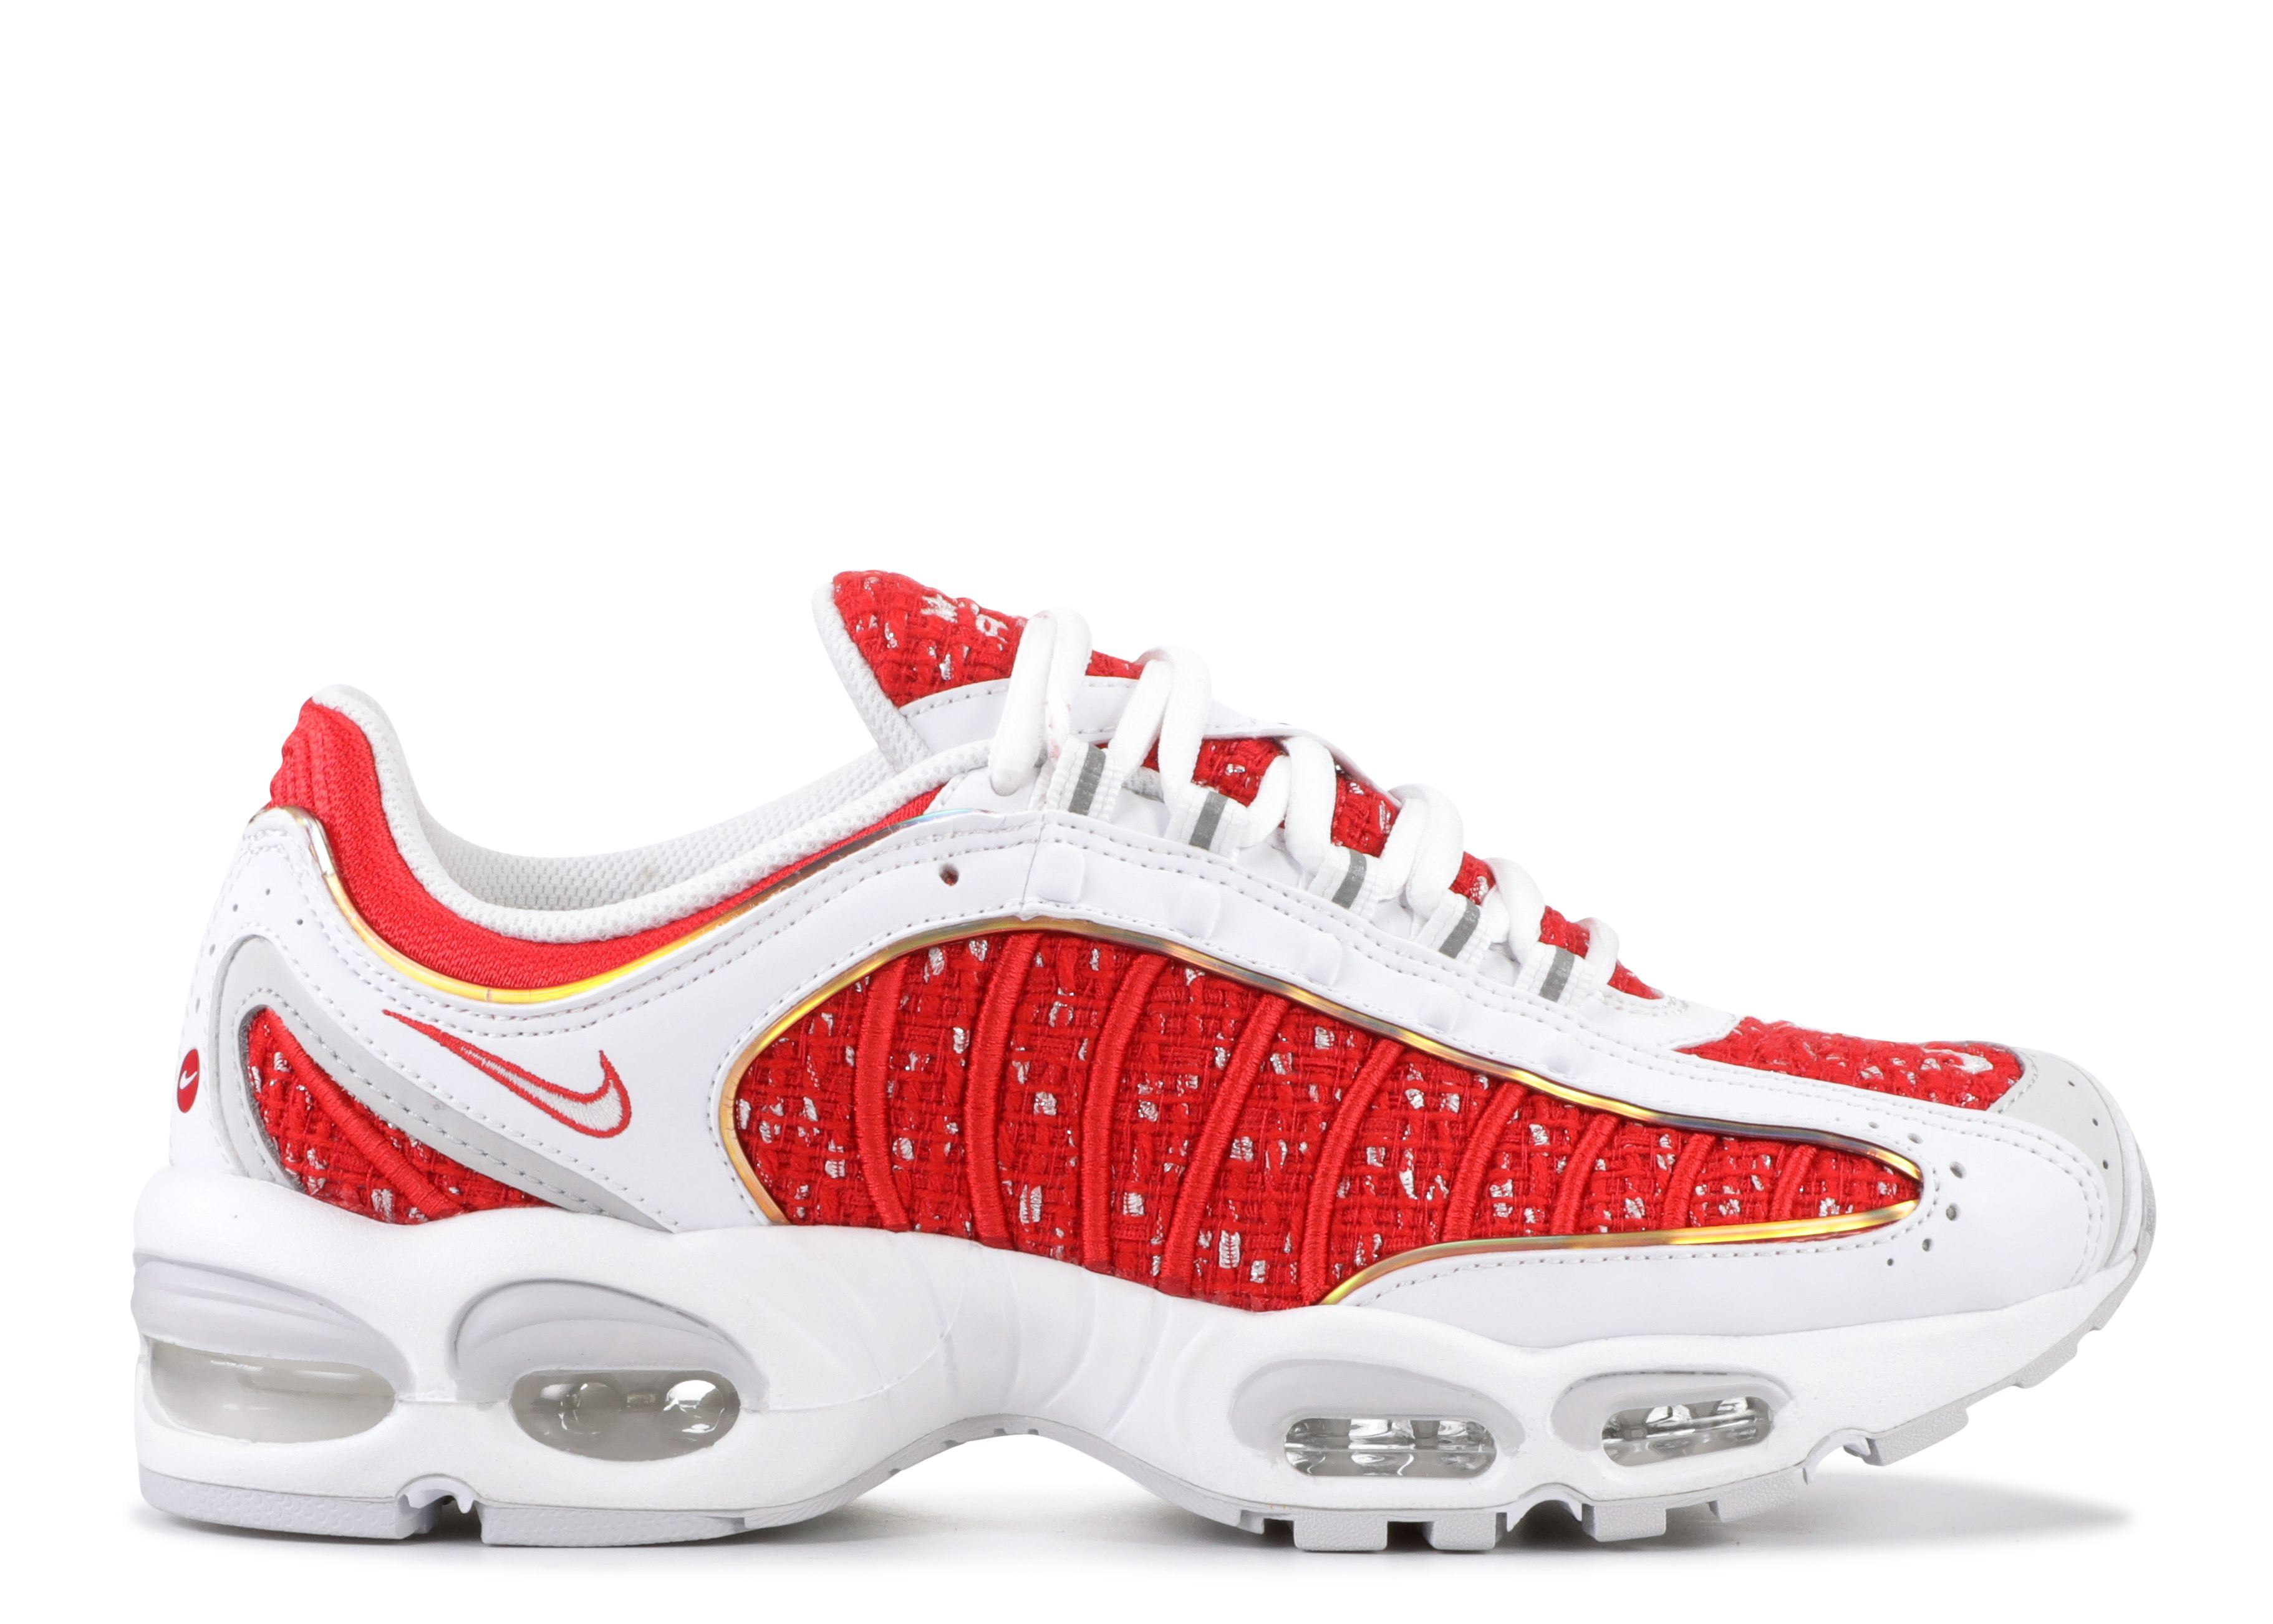 Supreme X Air Max Tailwind 4 'University Red' - Nike - AT3854 100 ...